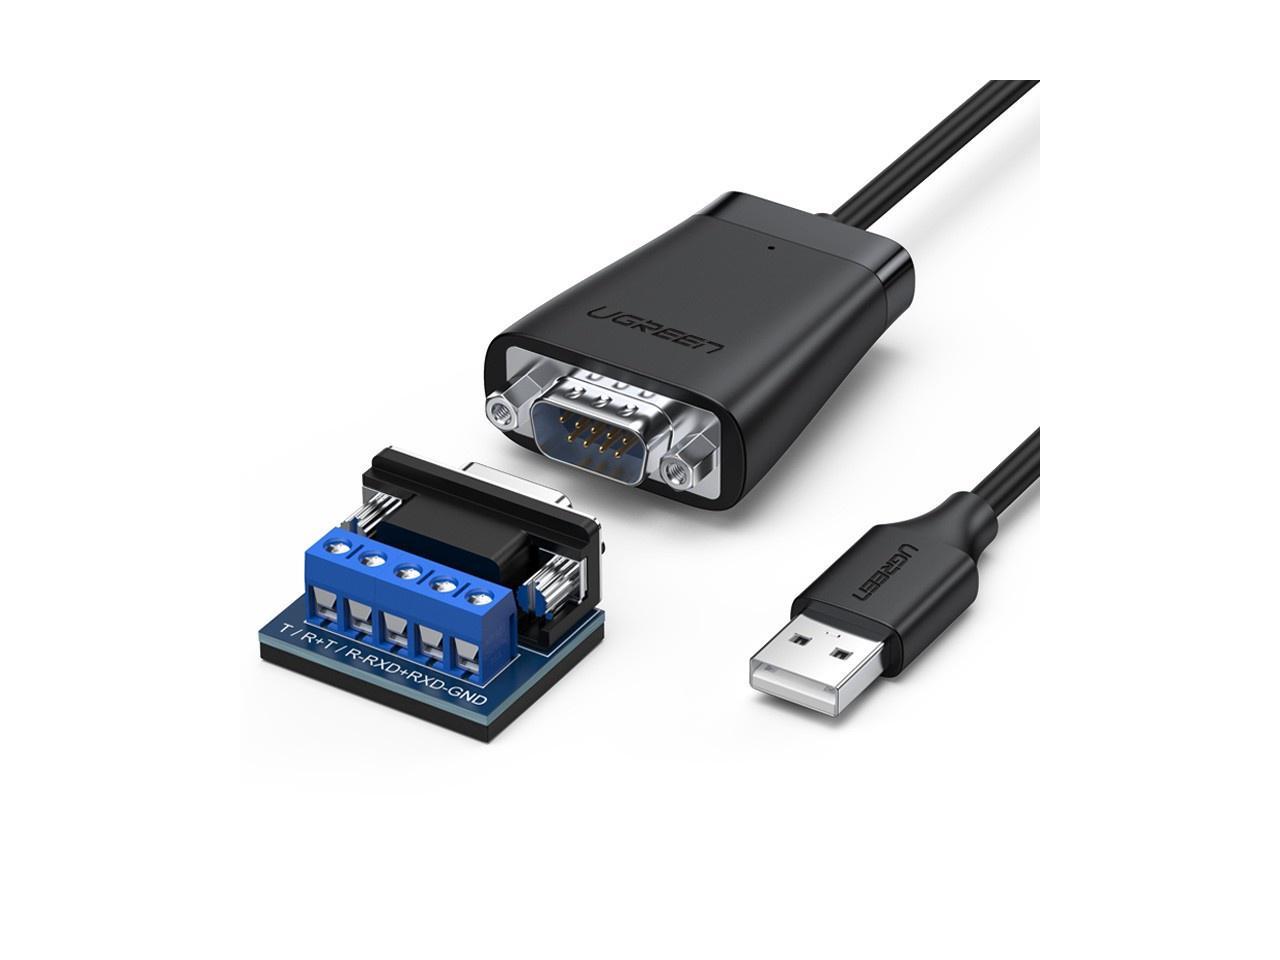 USB to 485 Converter cable, for Windows 8, Mac and Linux